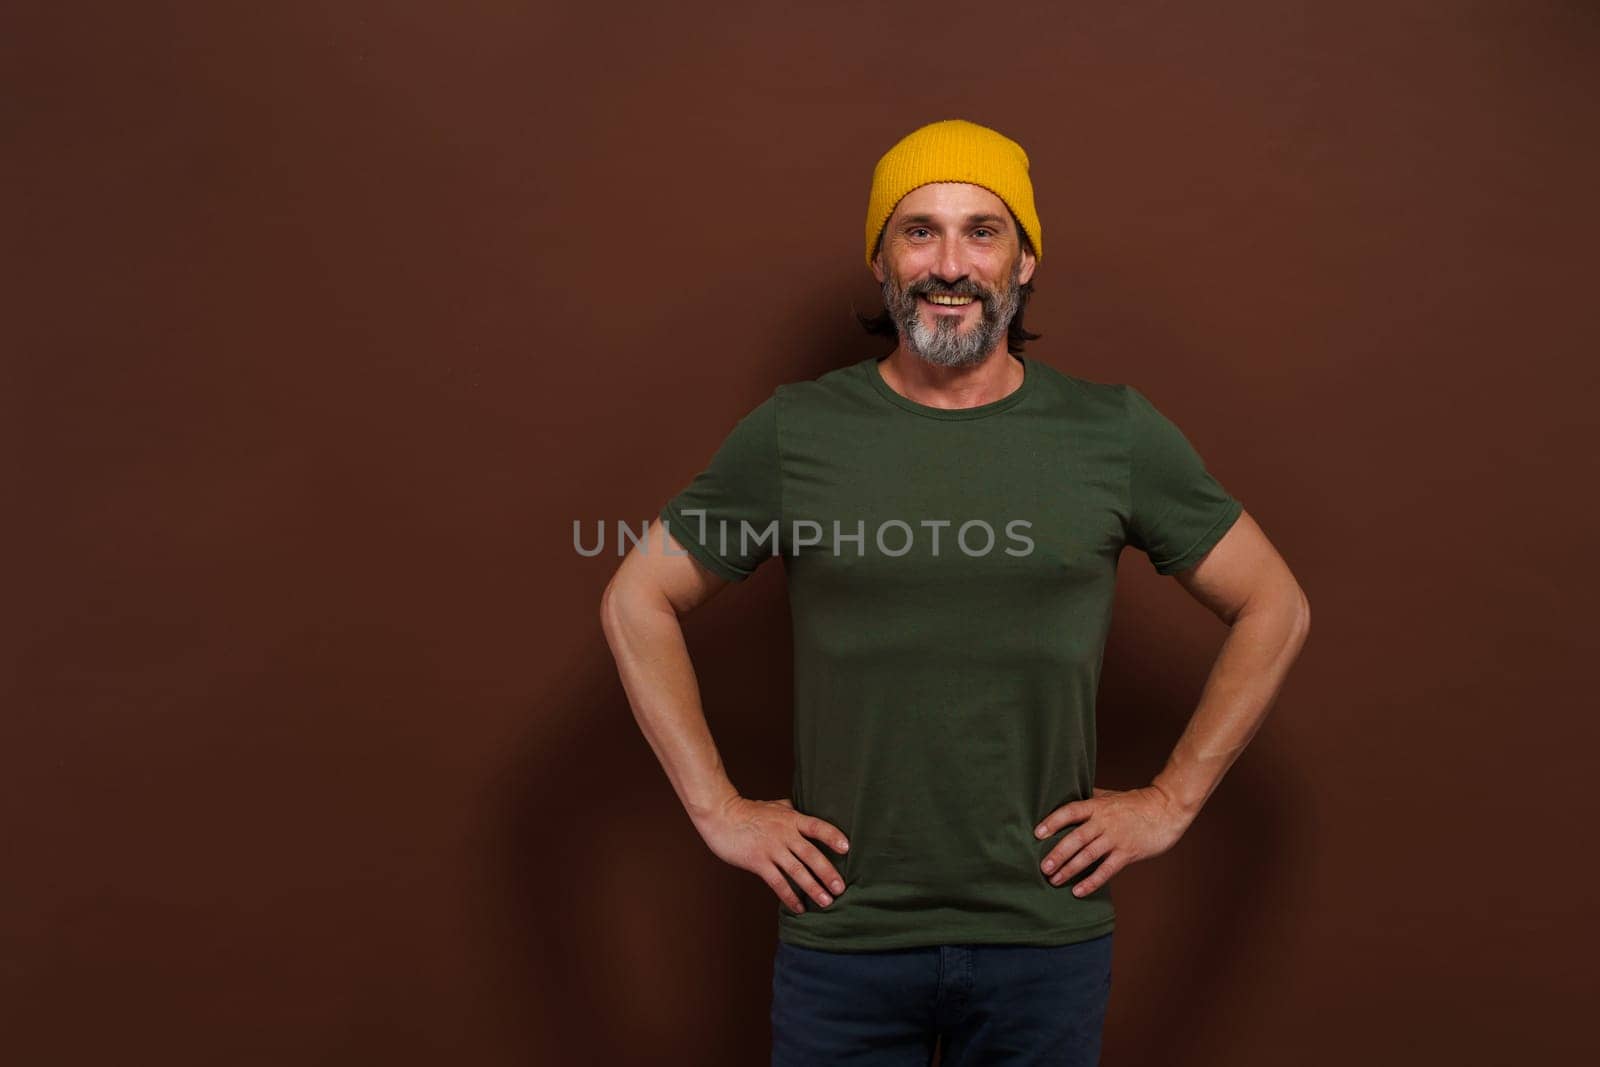 Happy confident middle-aged man standing with hands on sides on brown background. Posture and joyful smile convey sense of confidence, contentment, and success. mature individual in assertive stance. by LipikStockMedia